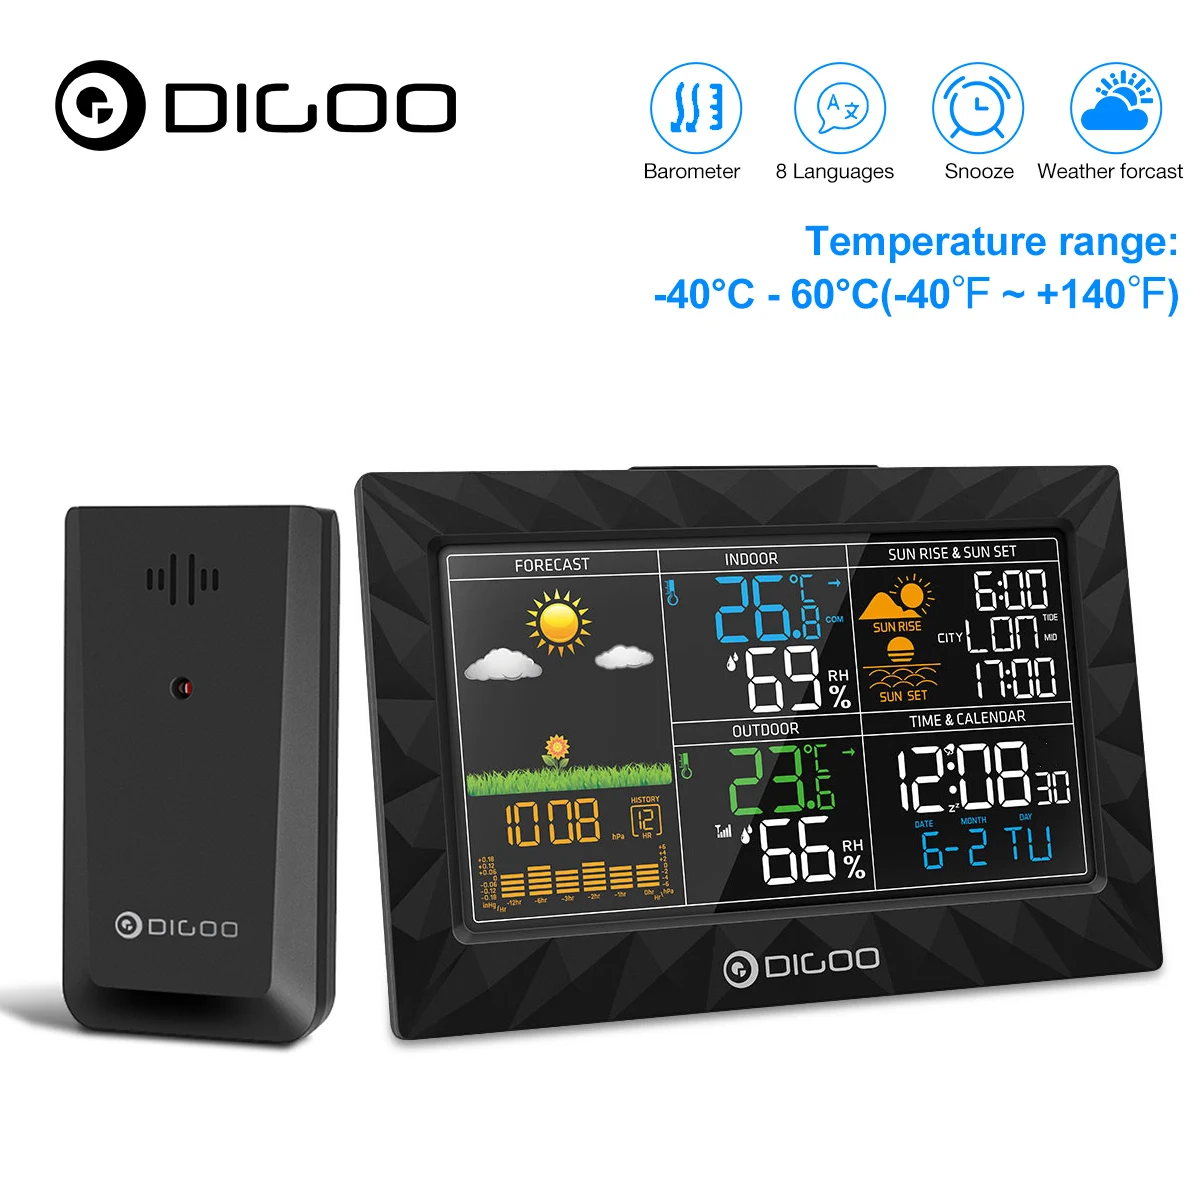 DIGOO DG-TH8988 LCD Weather Station Indoor Outdoor Thermometer Humidity Barometer Snooze Alarm Clock Sunrise Sunset Calendar